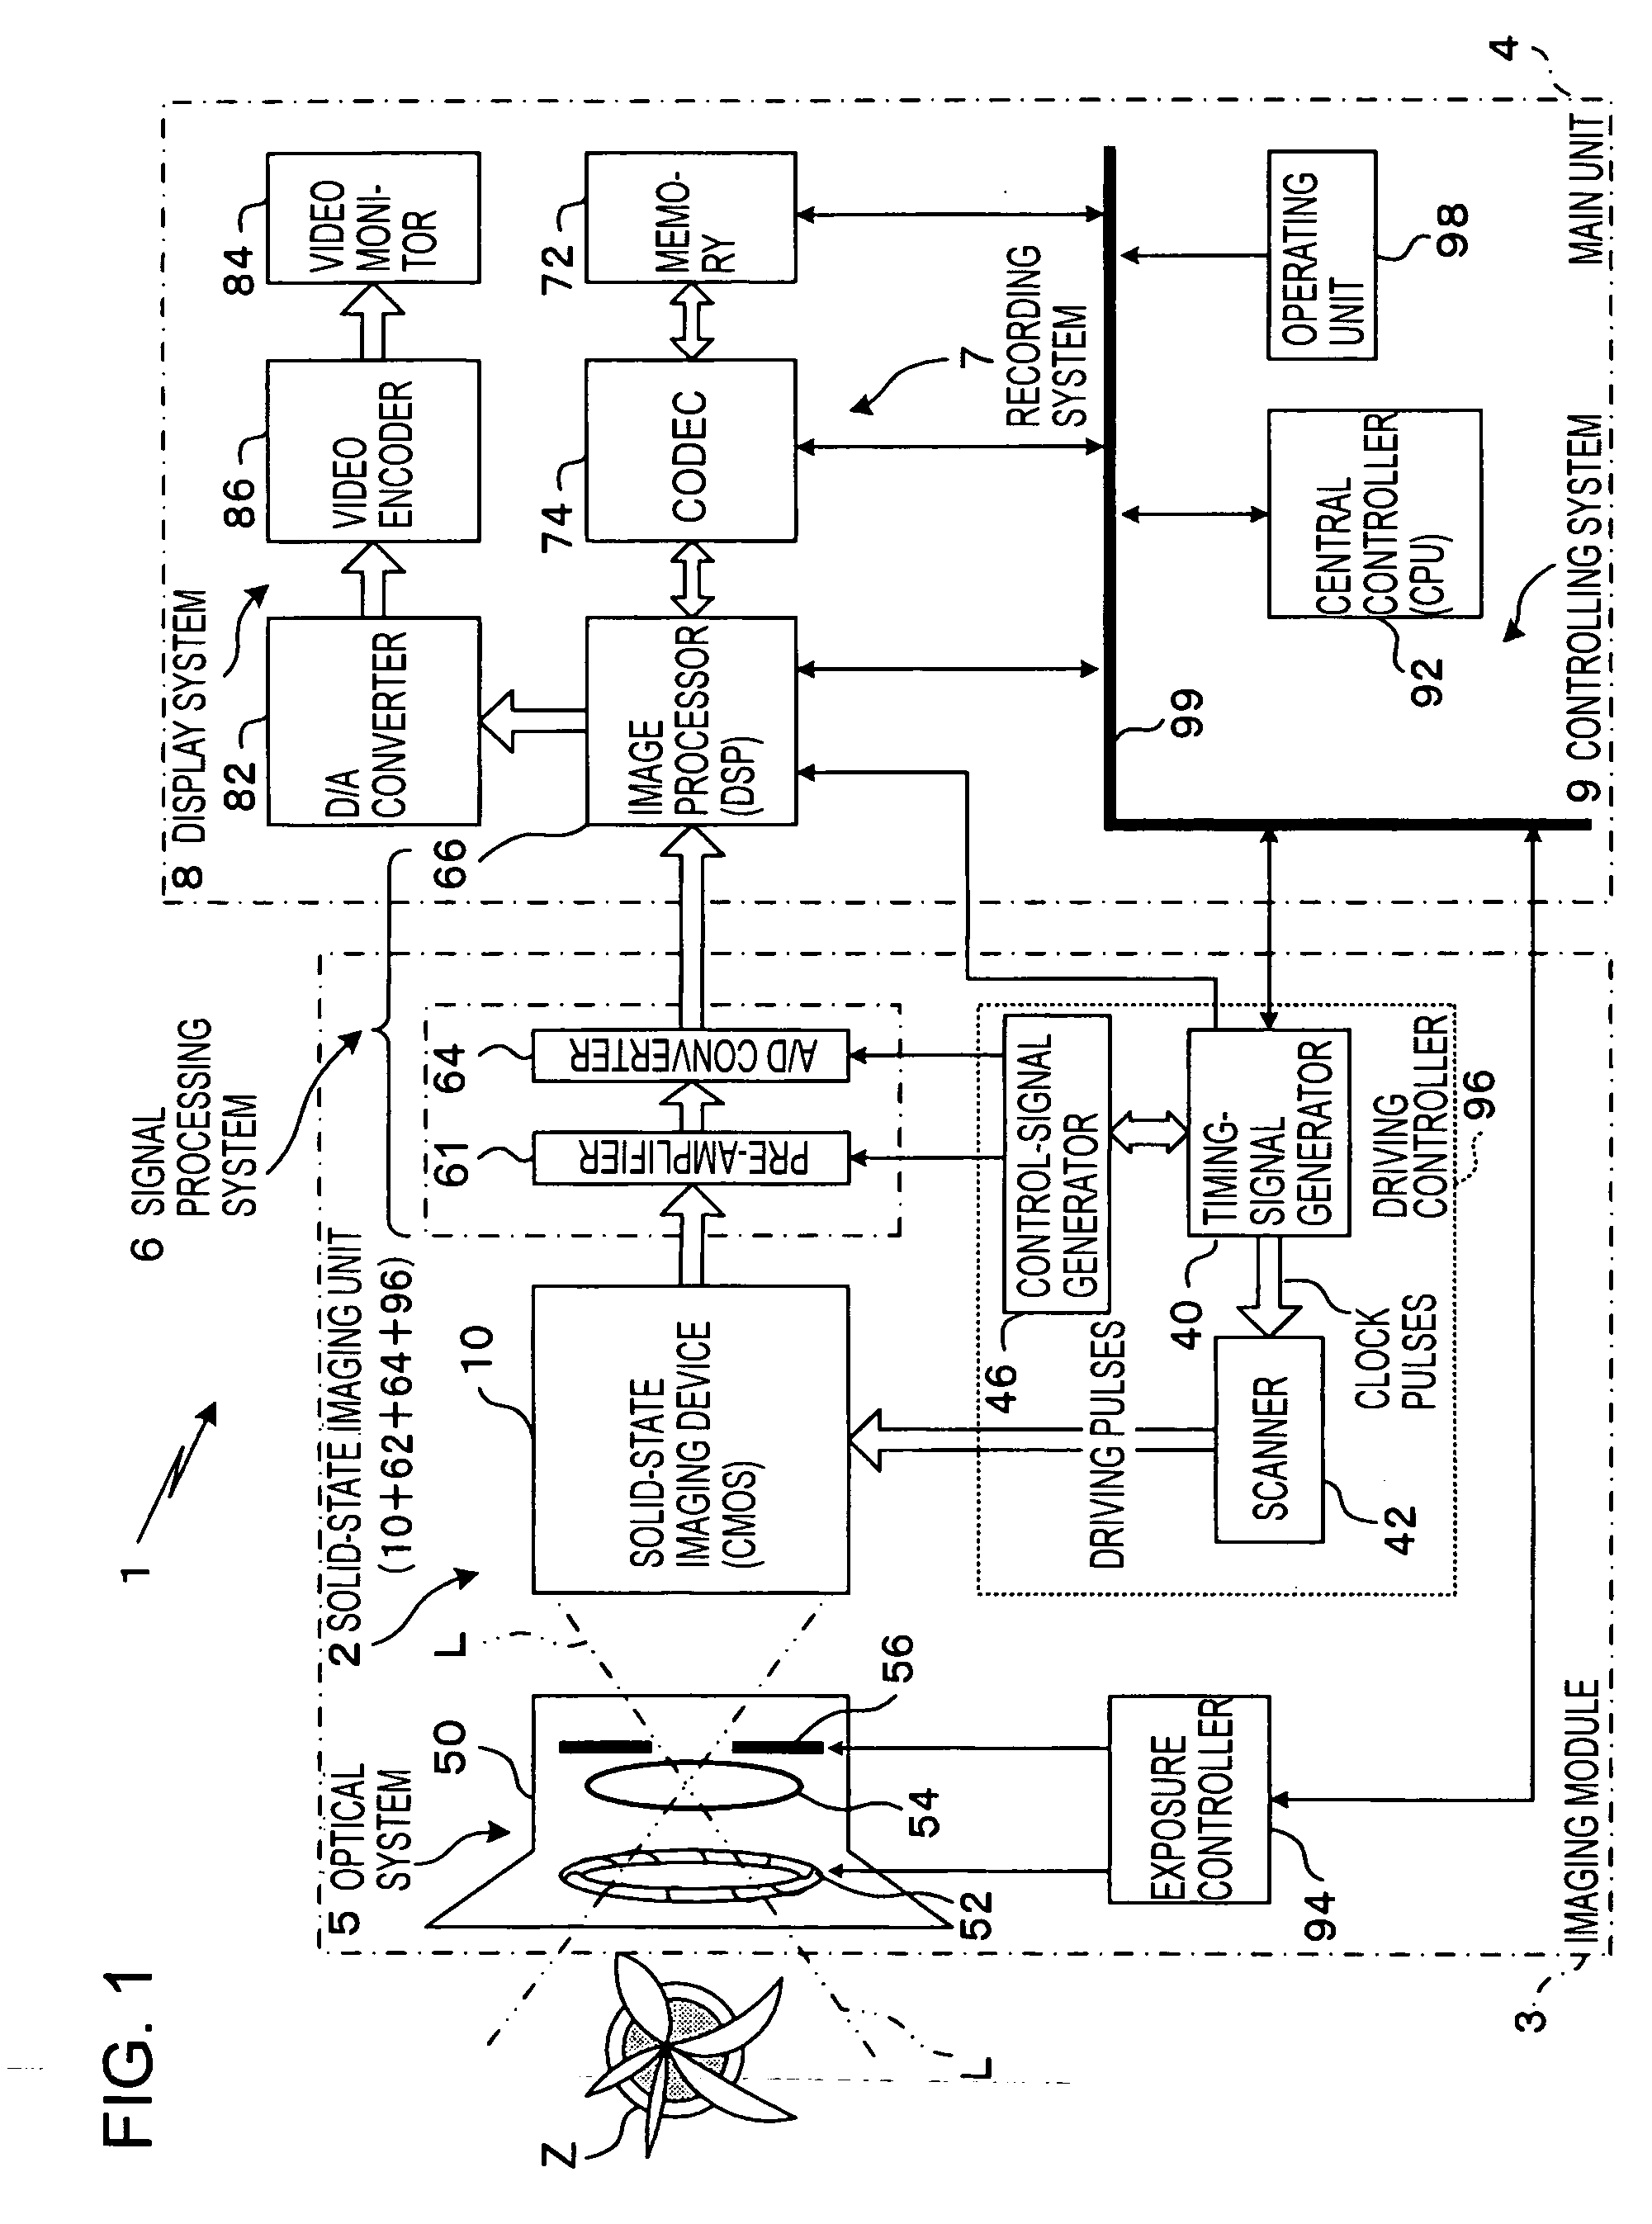 Method of controlling semiconductor device, signal processing method, semicondcutor device, and electronic apparatus